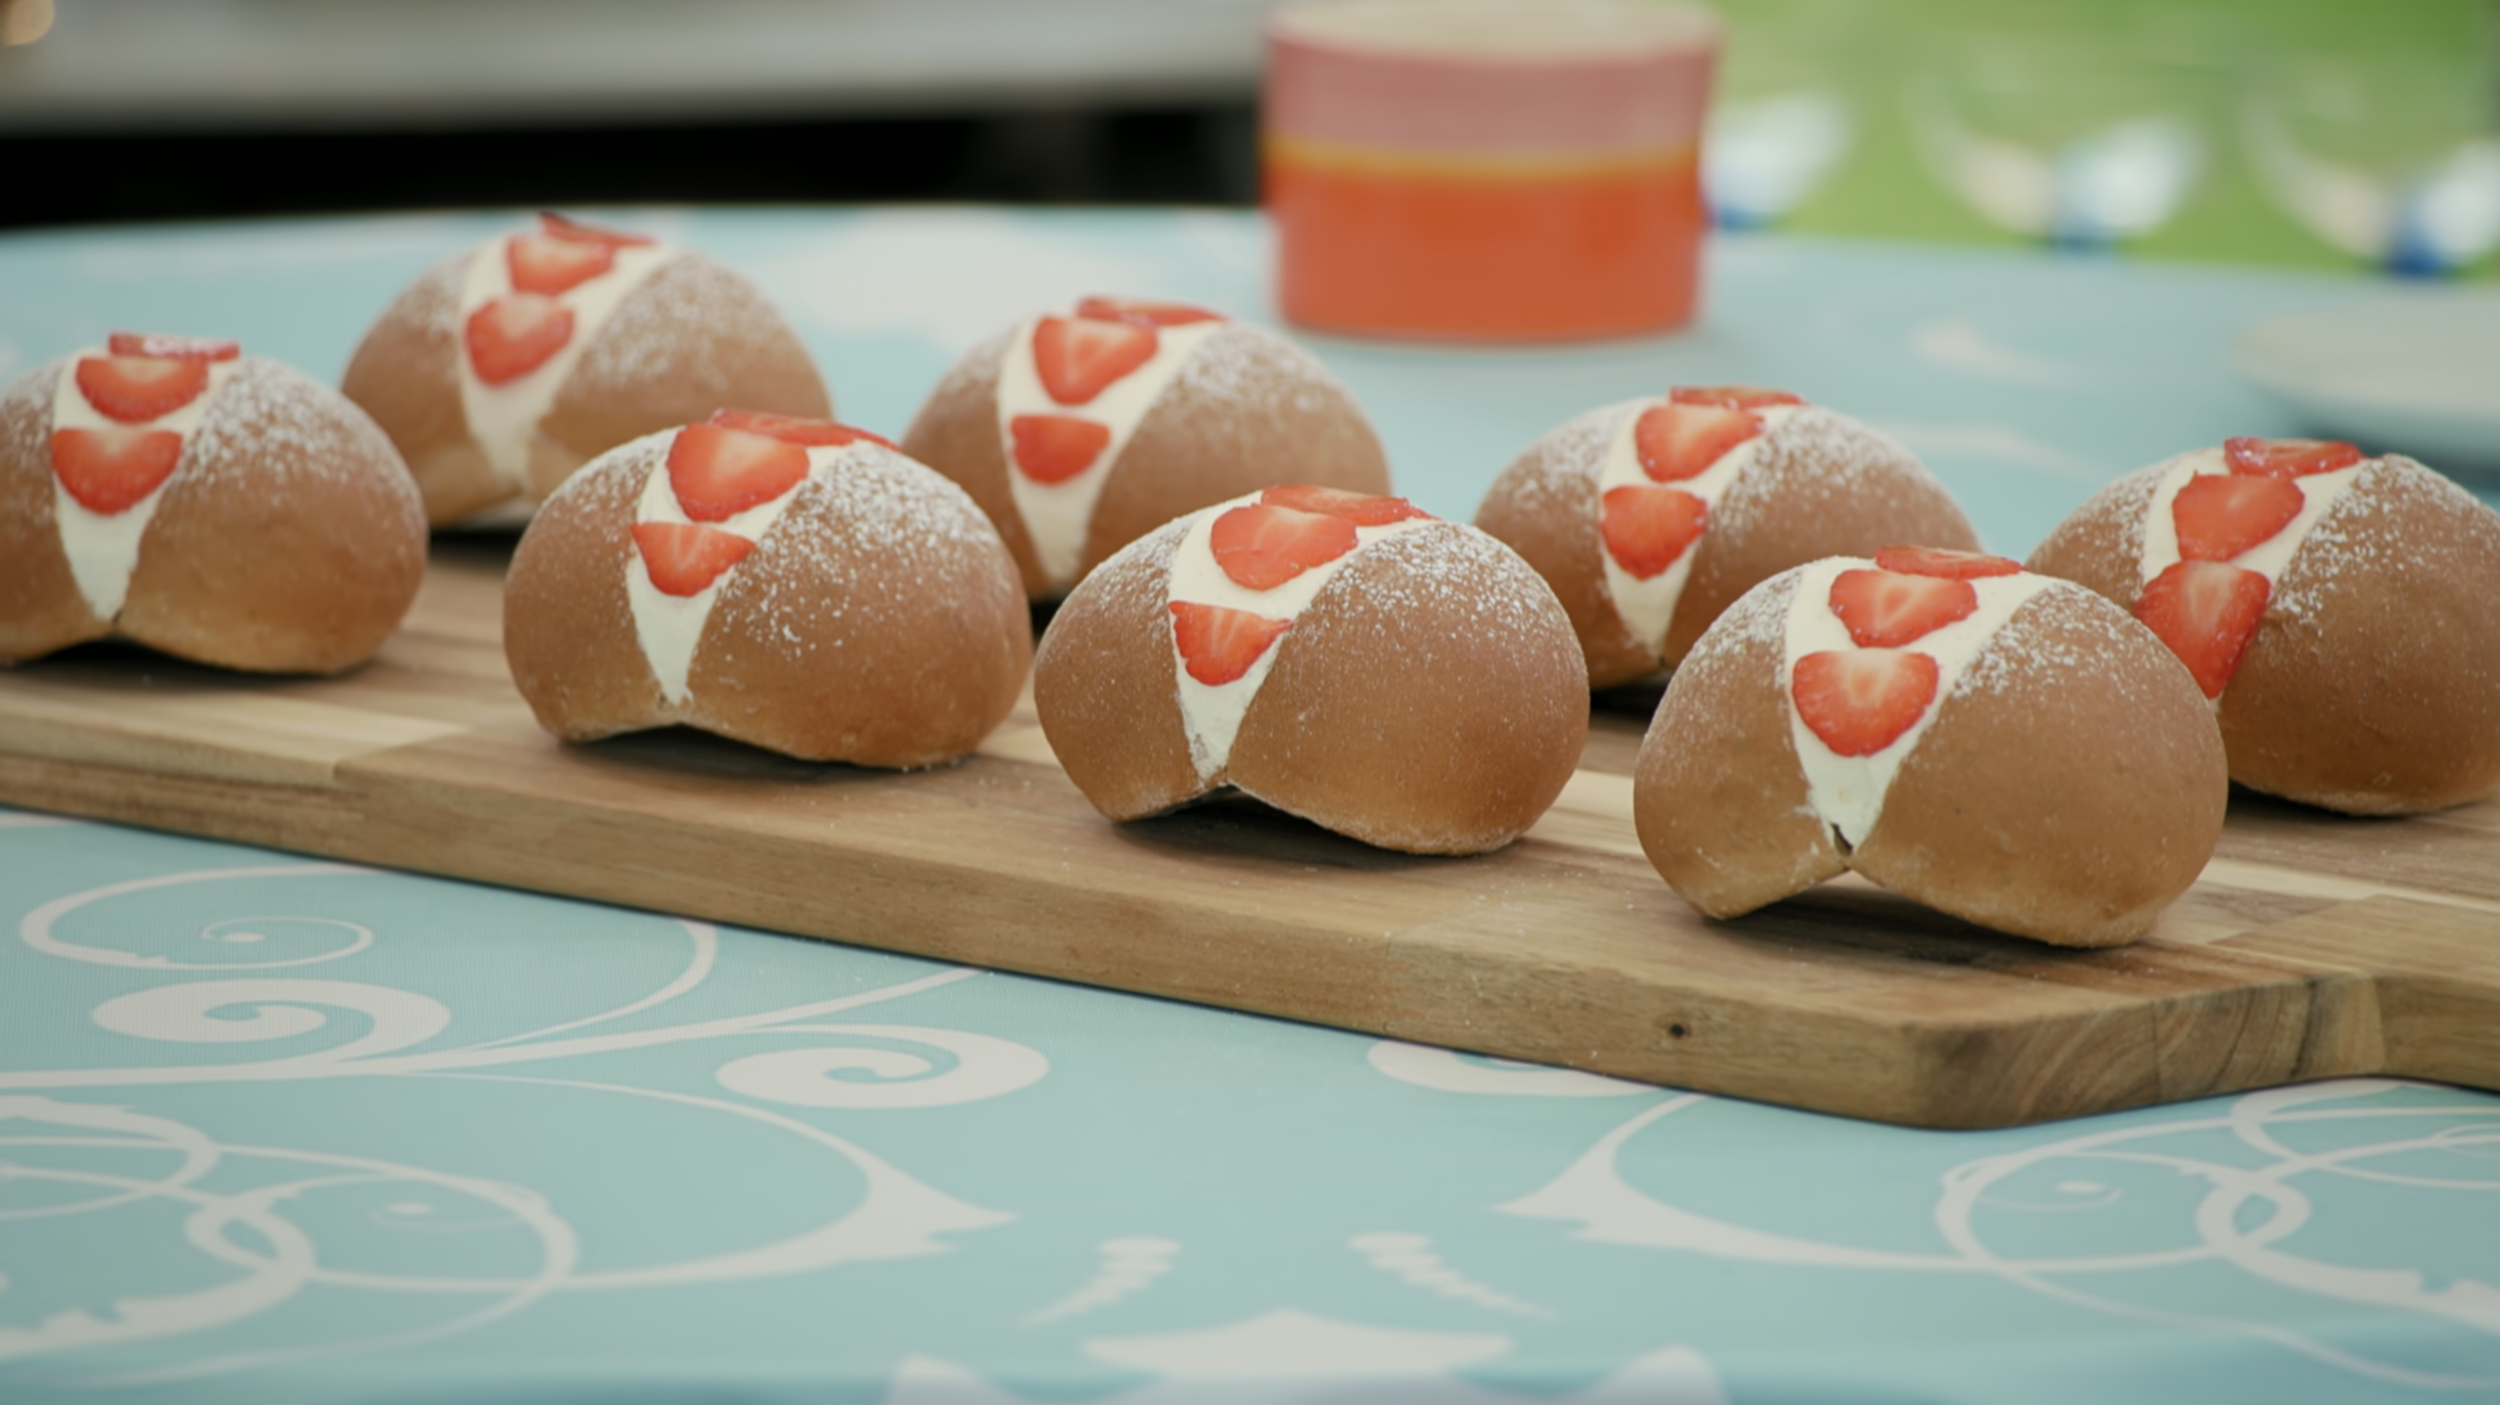 Paul Hollywood's Devonshire Splits, as shown on the Bread Week episode. They're very circular, very beautifully even in color, and very neatly decorated with cream and strawberries.